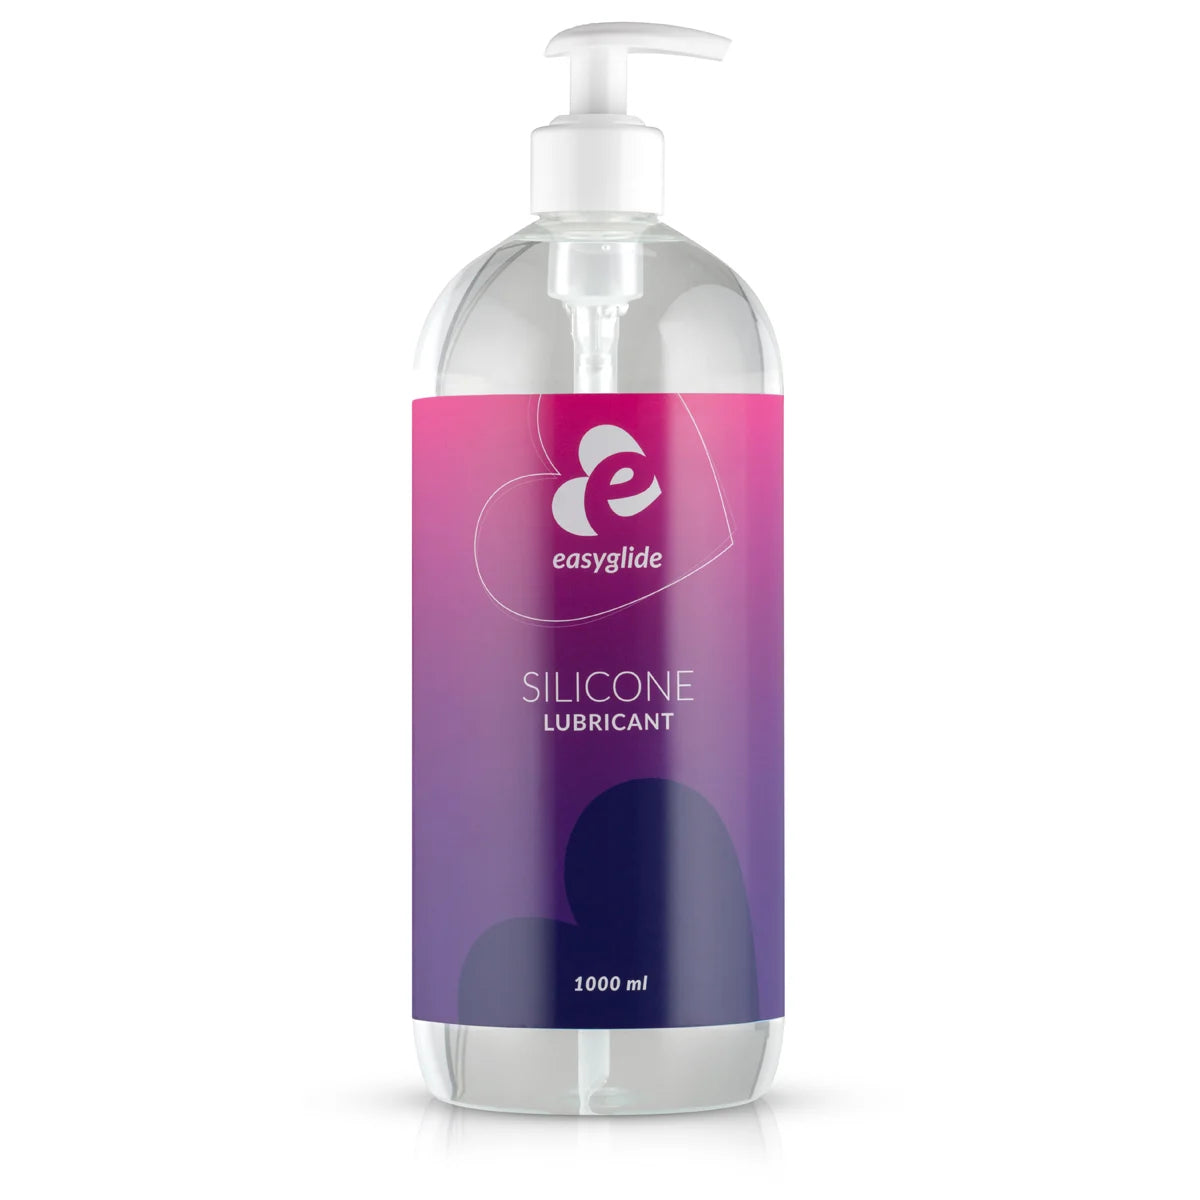 EASYGLIDE Silicone Lubricant 1000ml